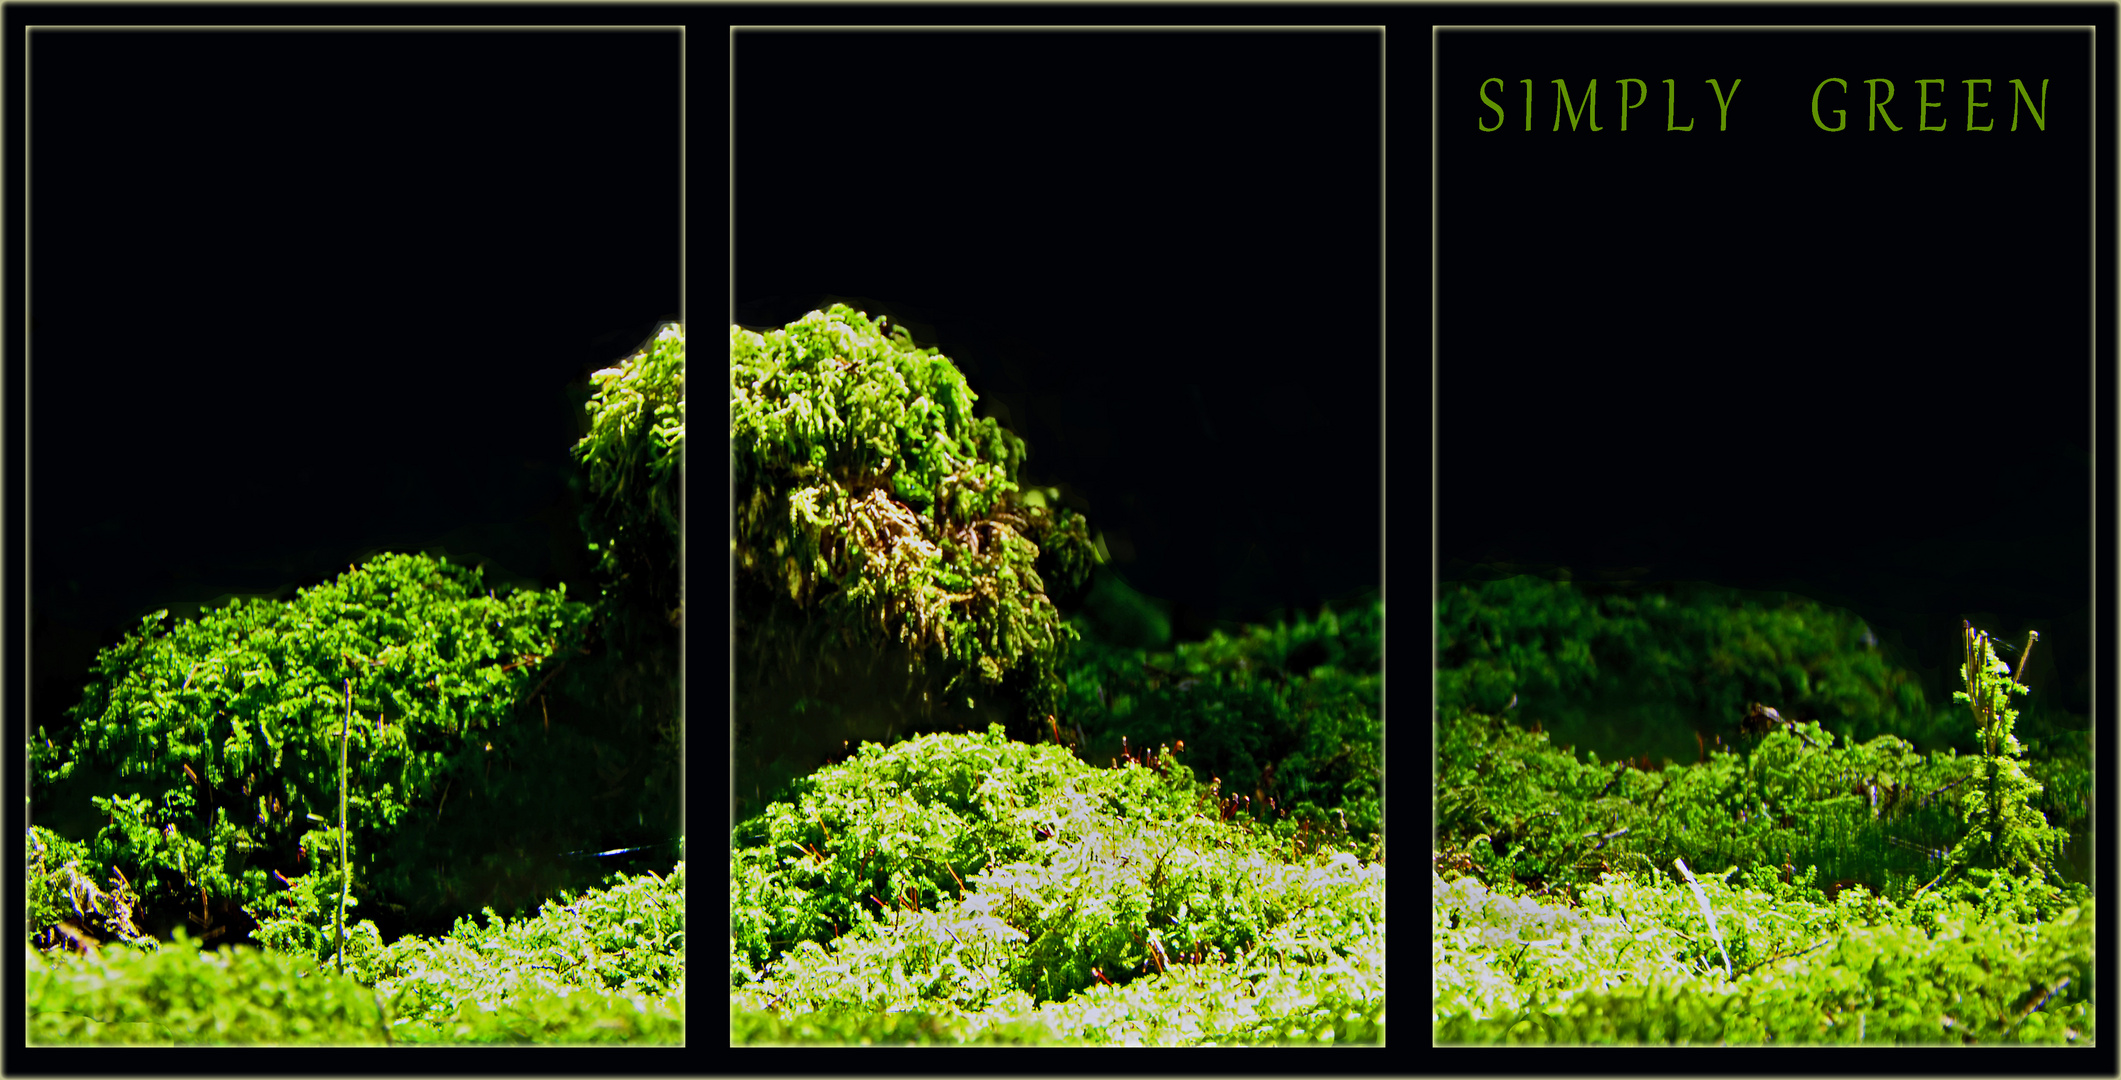 - SIMPLY GREEN -